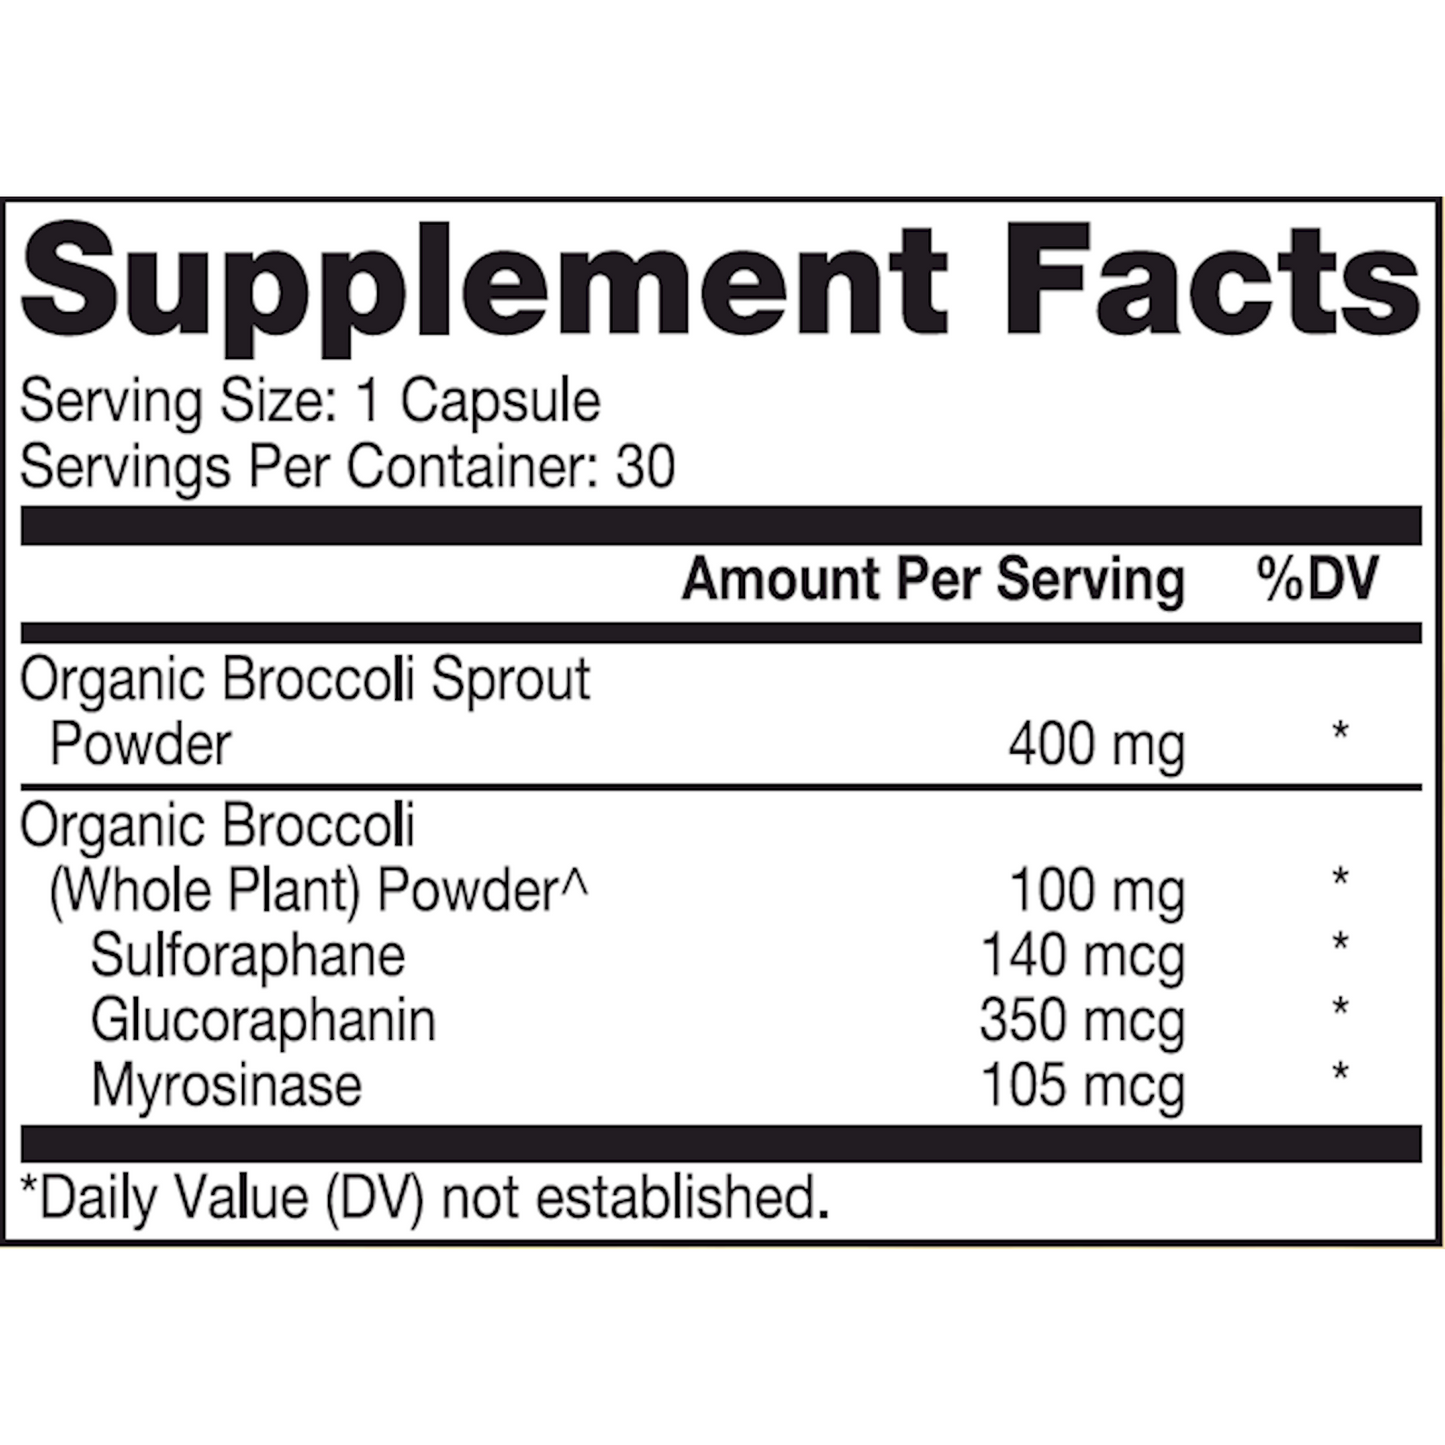 Dr. Mecola Fermented Broccoli Sprouts